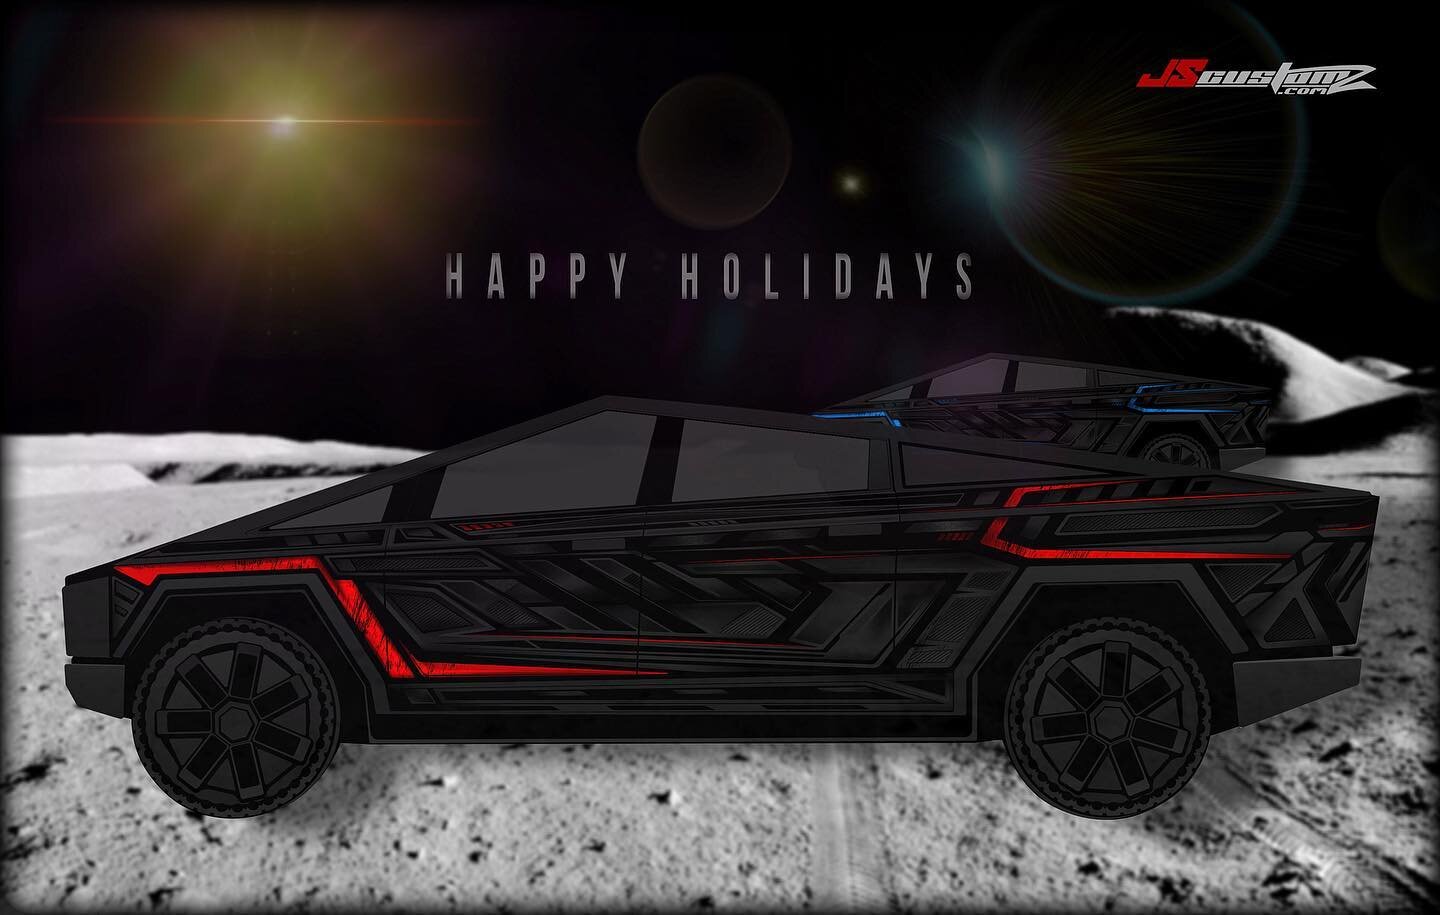 ▪️Happy Holidays From us Here @jscustomzusa 
▪️The Best Is Yet To Come▪️

▪️Get your Custom #GraphicKits for SEADOO YAMAHA &amp; KAWASAKI Models, Vassel Registrations▪️Custom Work▪️Top Quality Materials▪️Vinyls Stickers &amp; More Available Now▪️
Sho